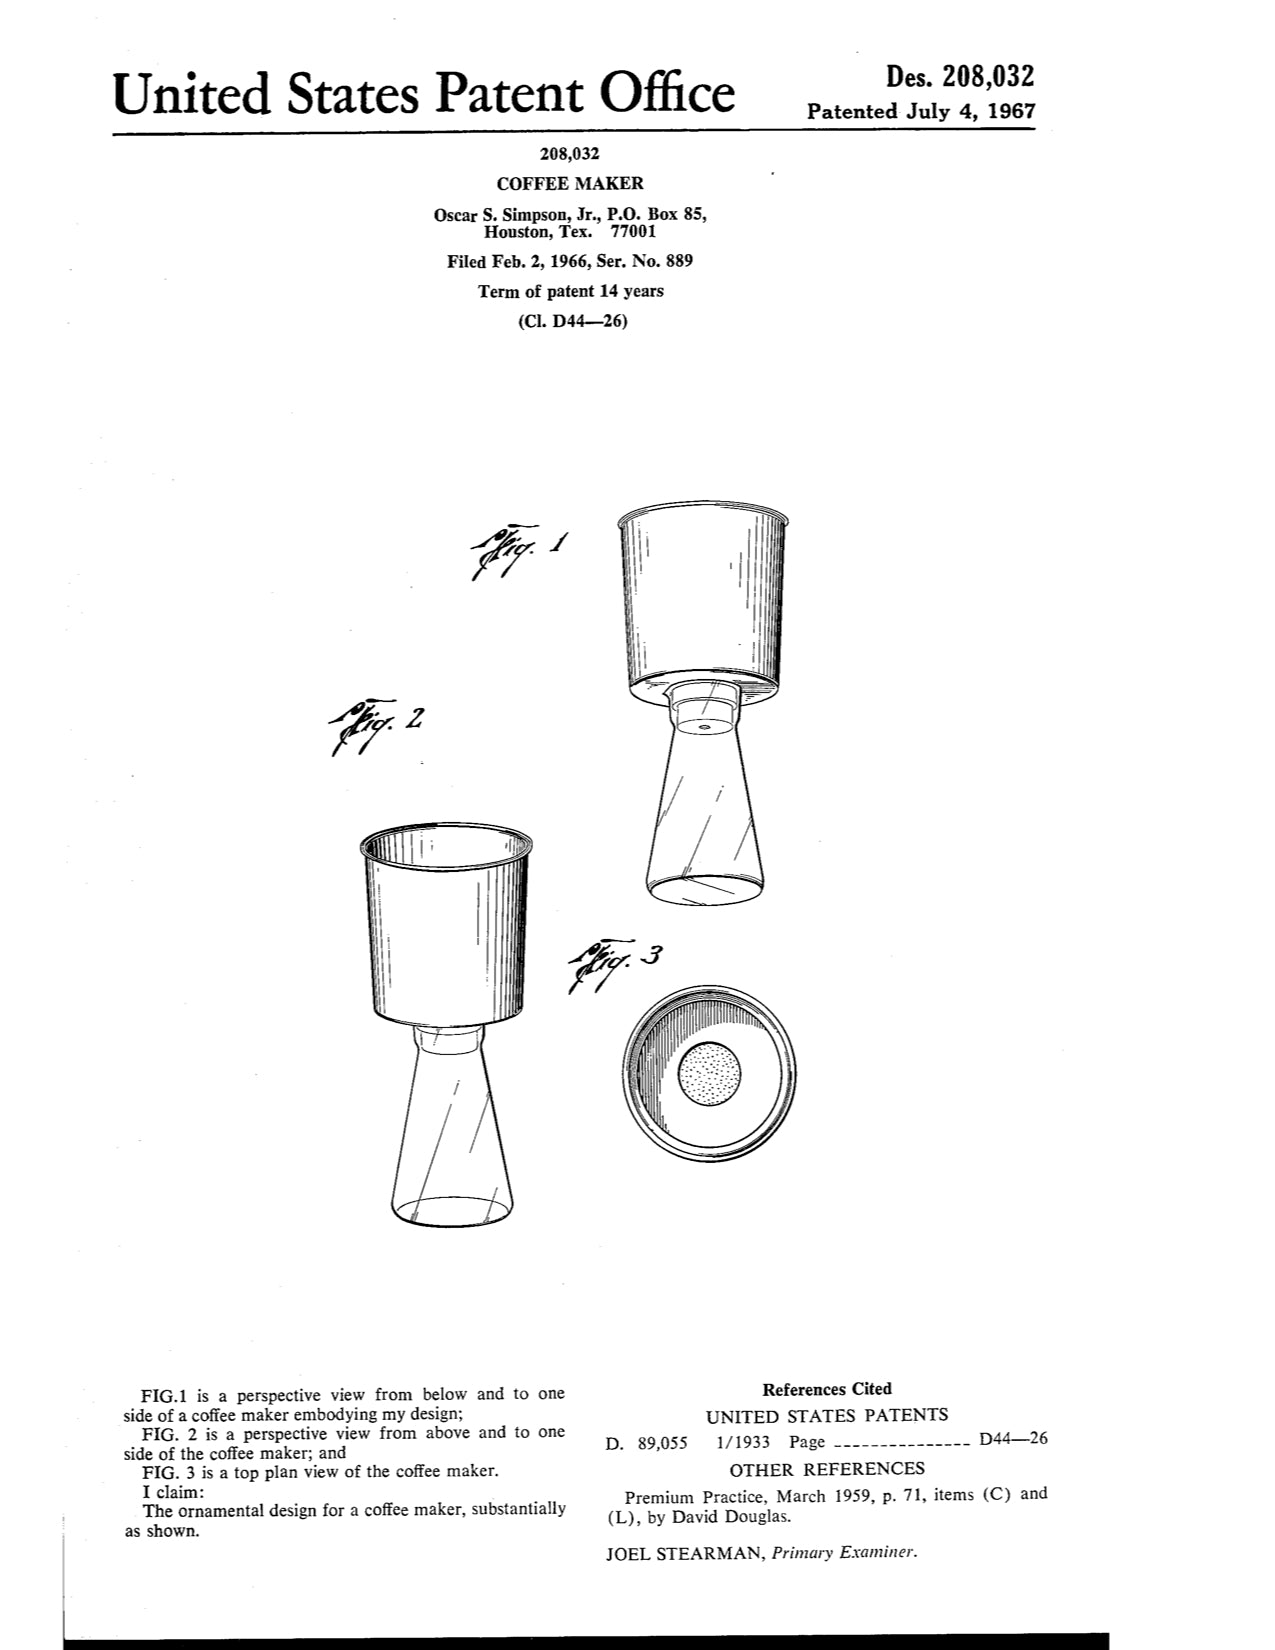 United States patent sketches for Toddy